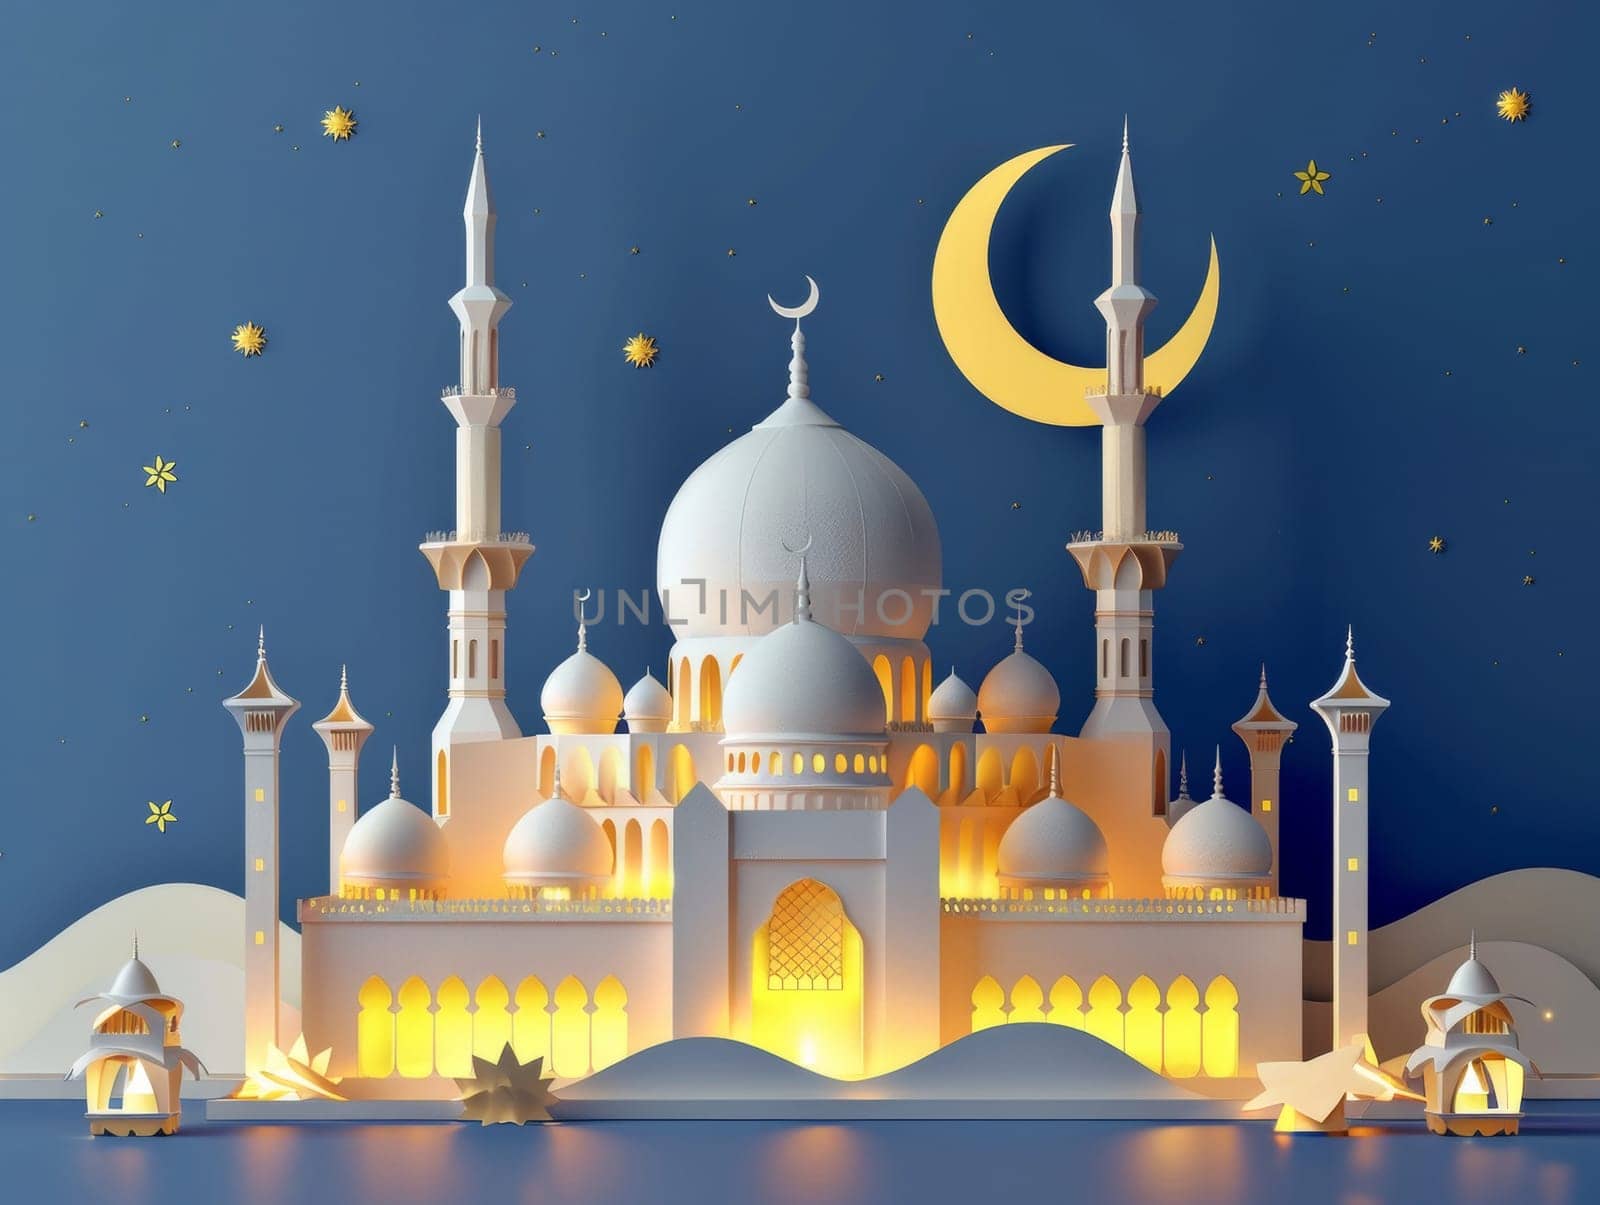 Vibrant golden hour illustration of a mosque with a majestic crescent moon, crafted in a 3D paper art style, exuding warmth and celebration